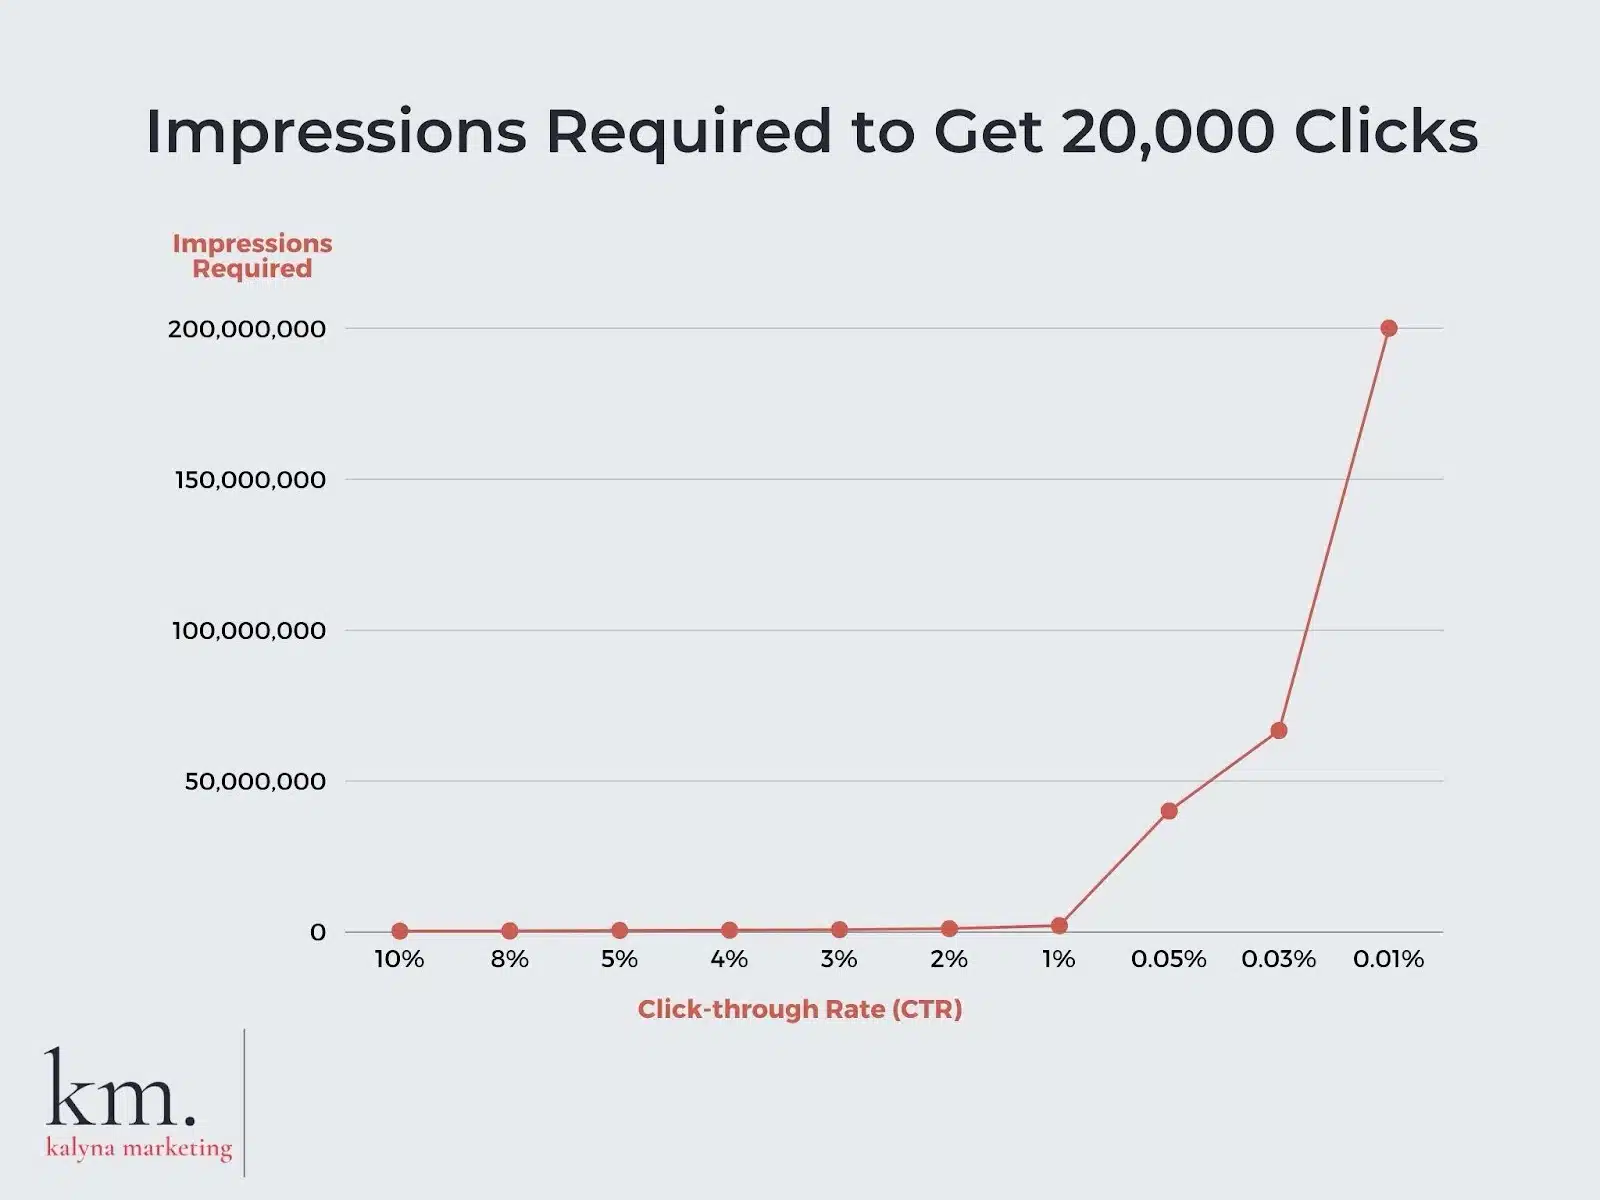 As your CTR decreases, the amount of impressions you need to maintain the same number of clicks increases exponentially.